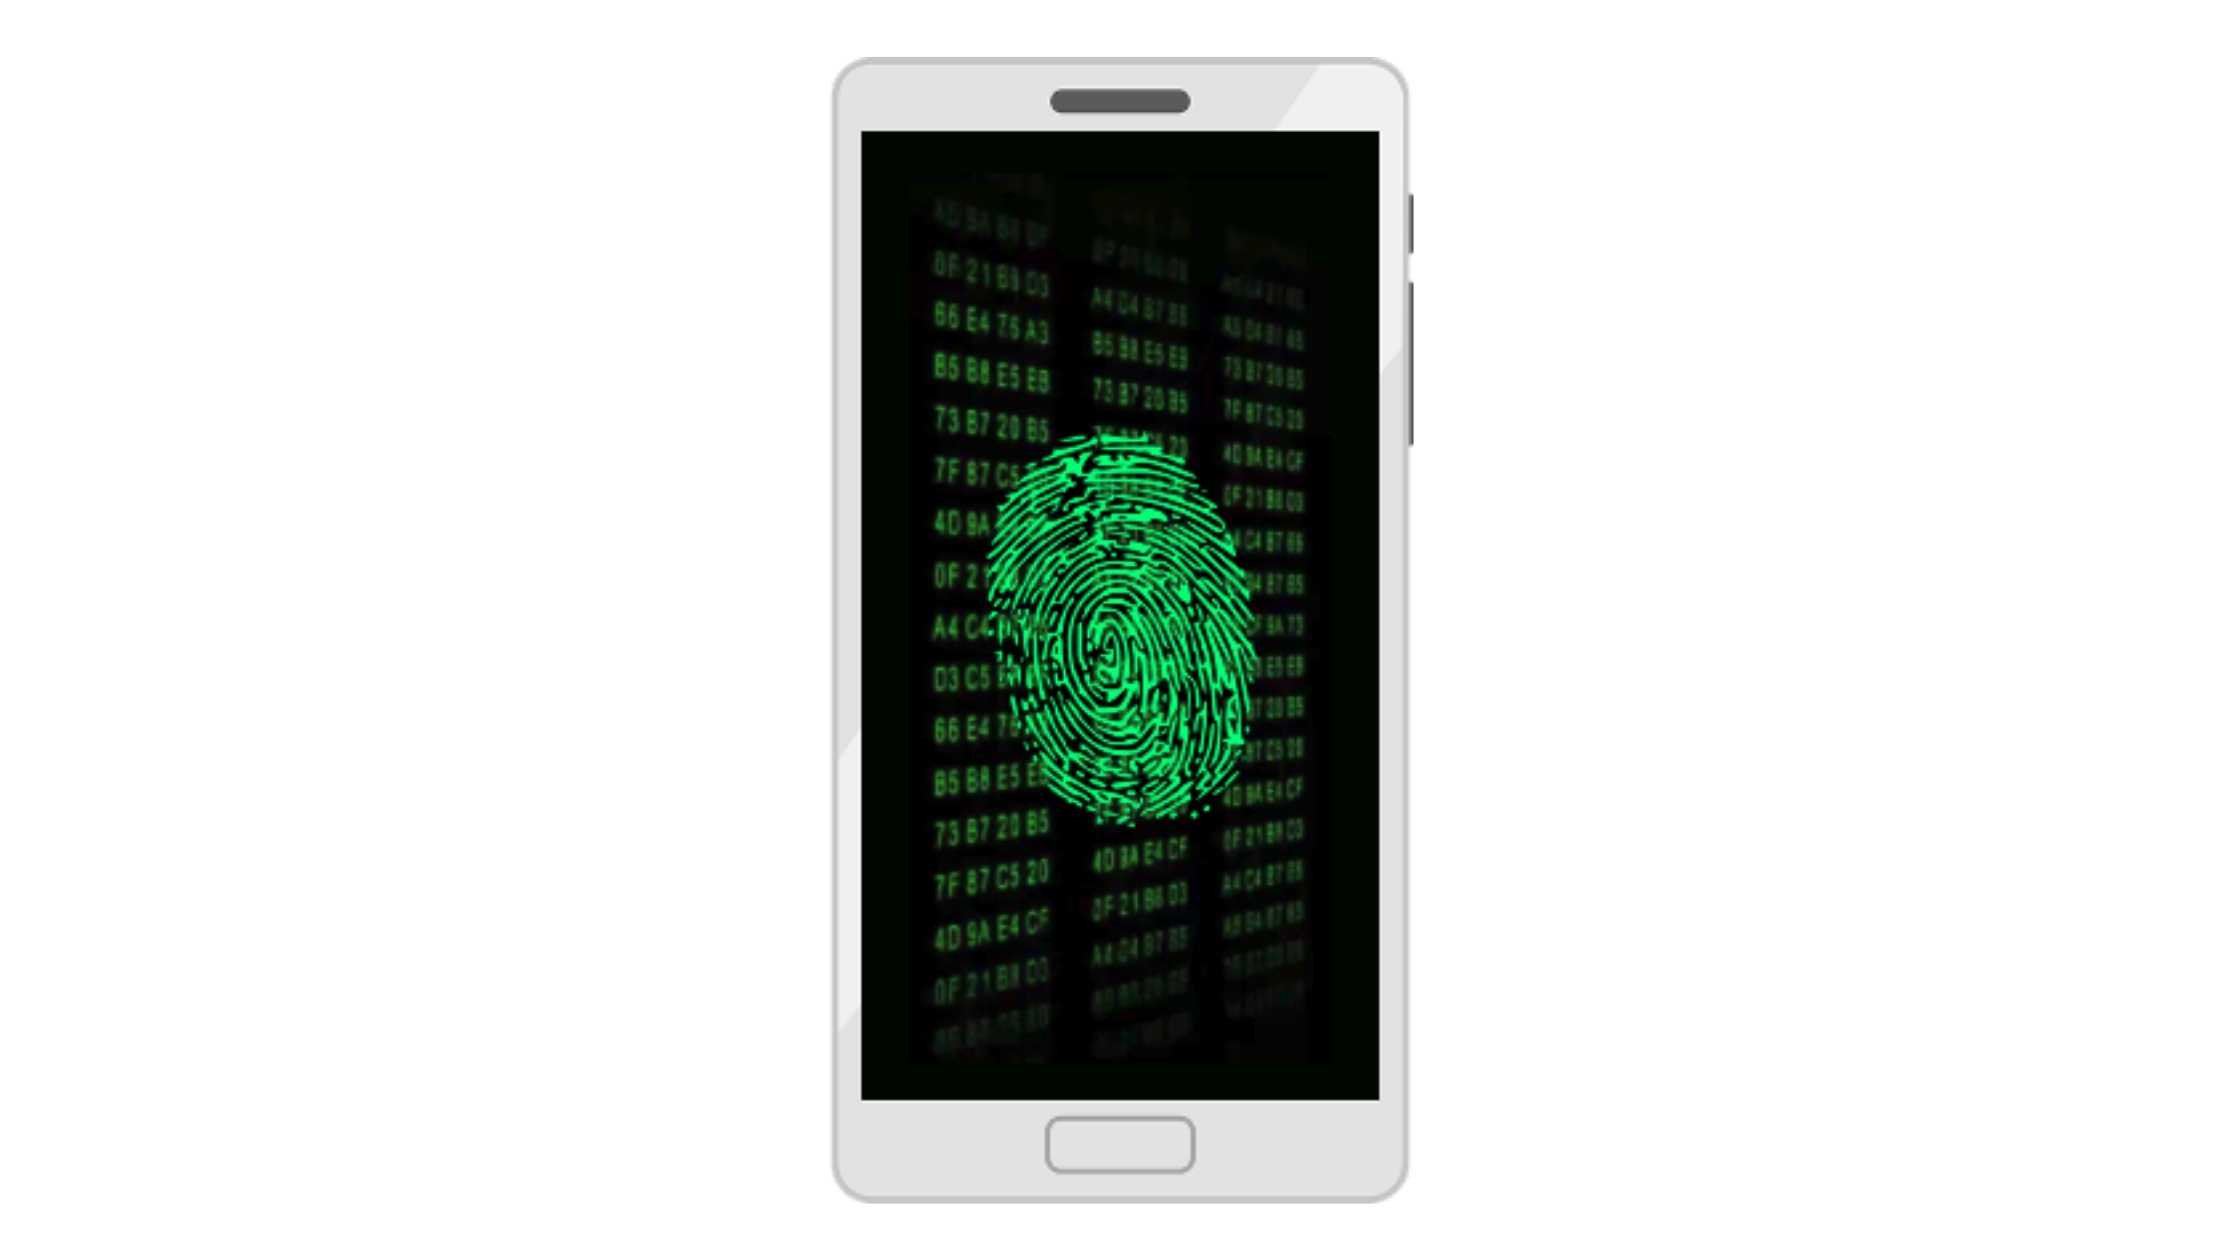 Mobile phone with fingerprint authentication